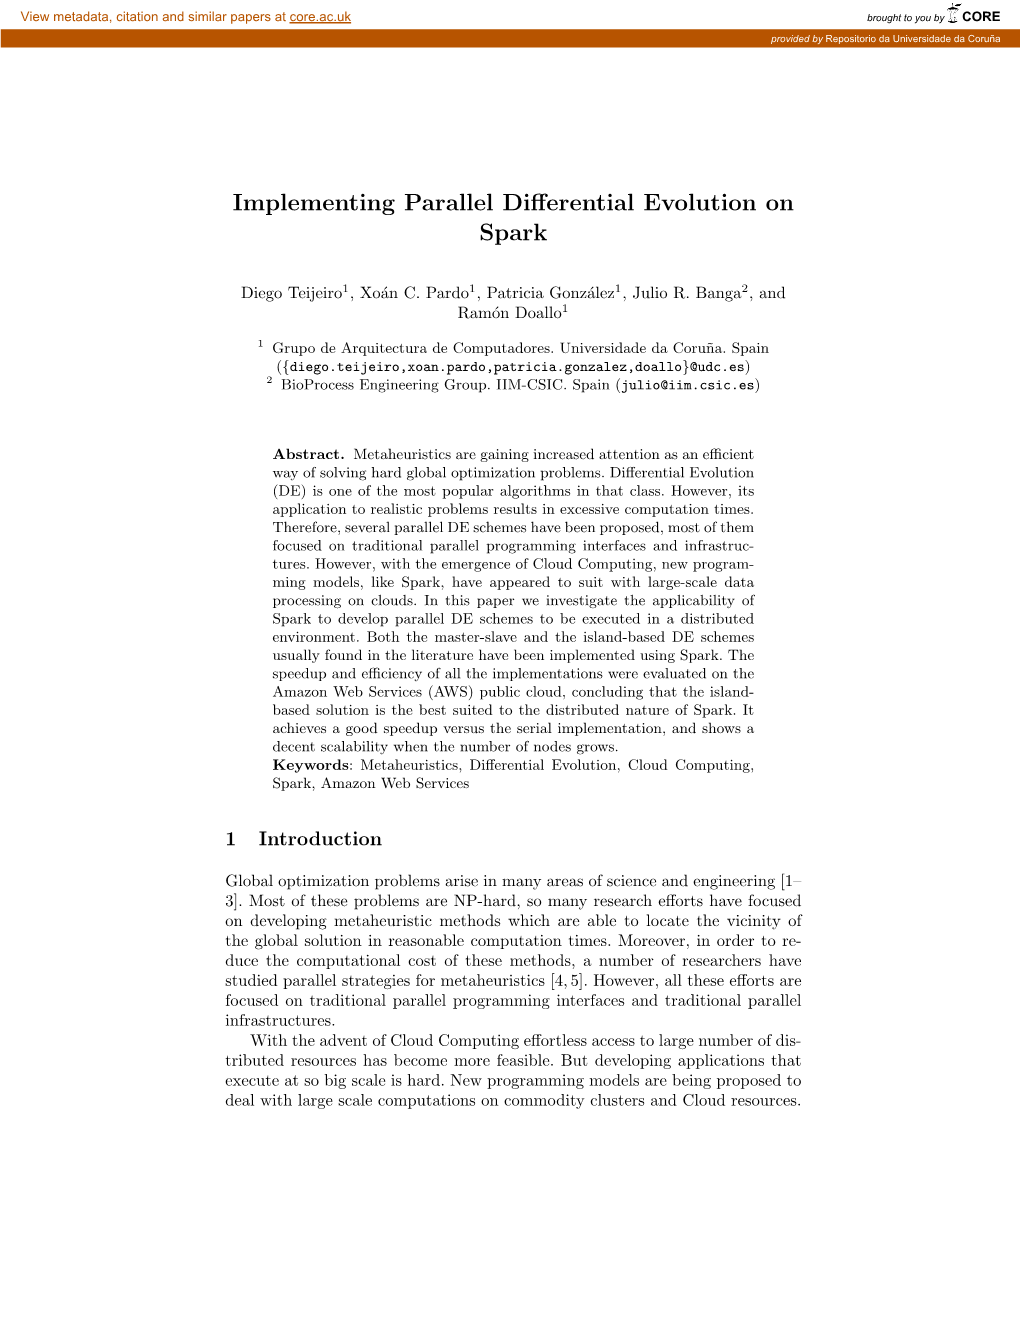 Implementing Parallel Differential Evolution on Spark